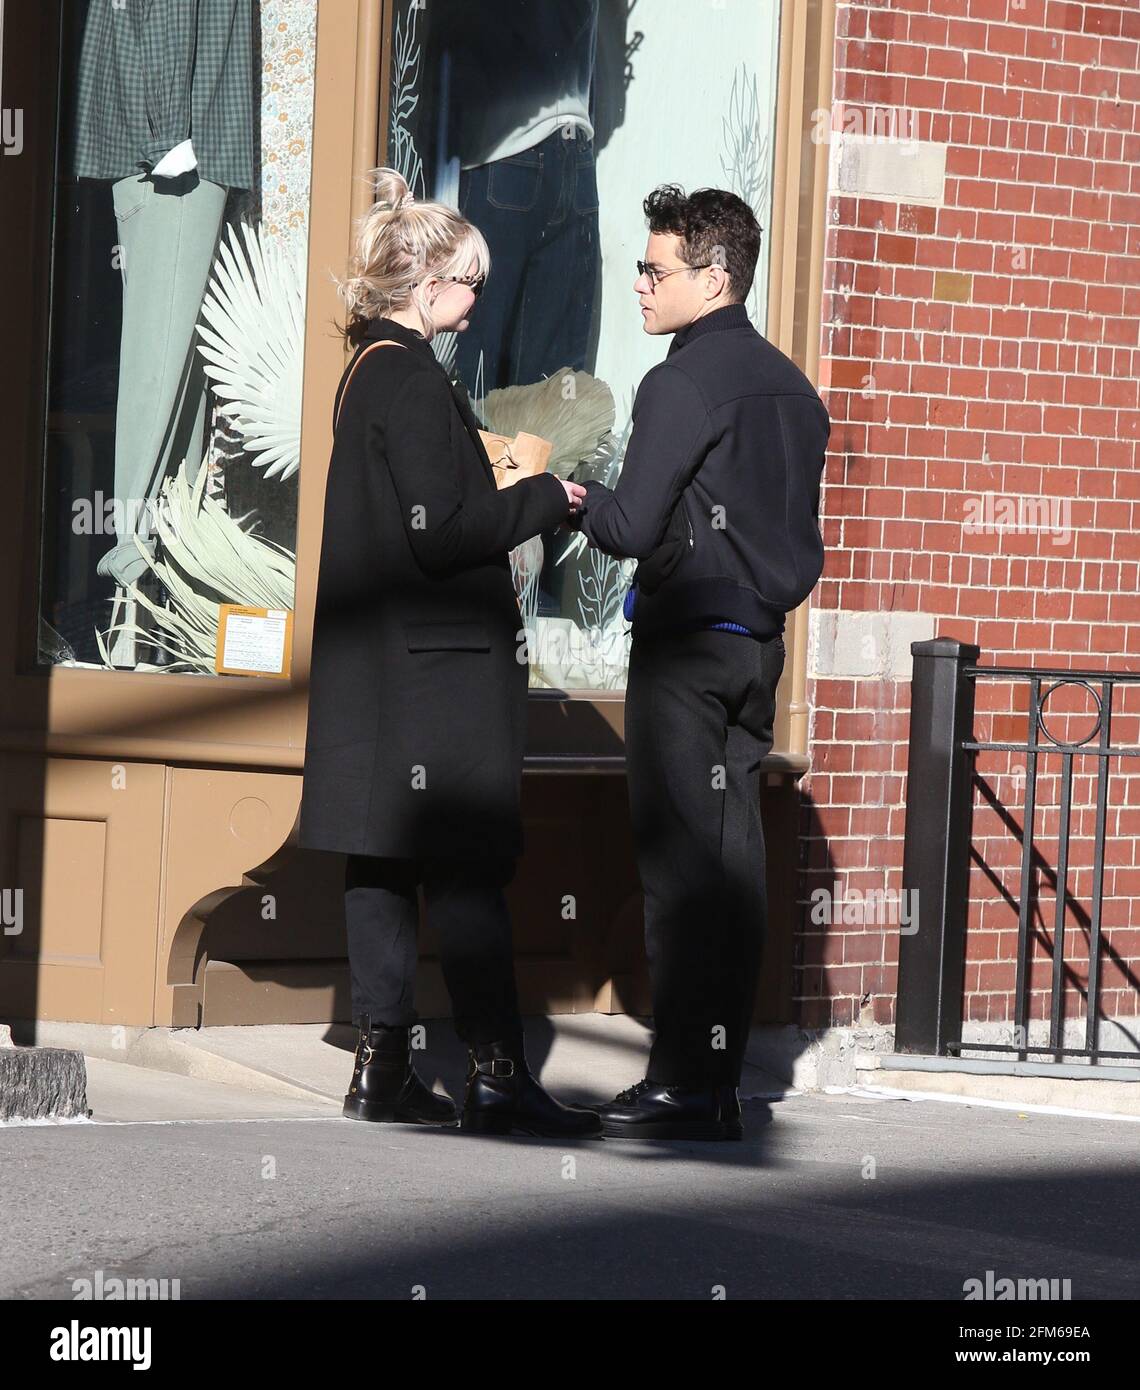 New York - NY - 03/01/20 - Lucy Boynton shopping by herself in Soho and  then meeting